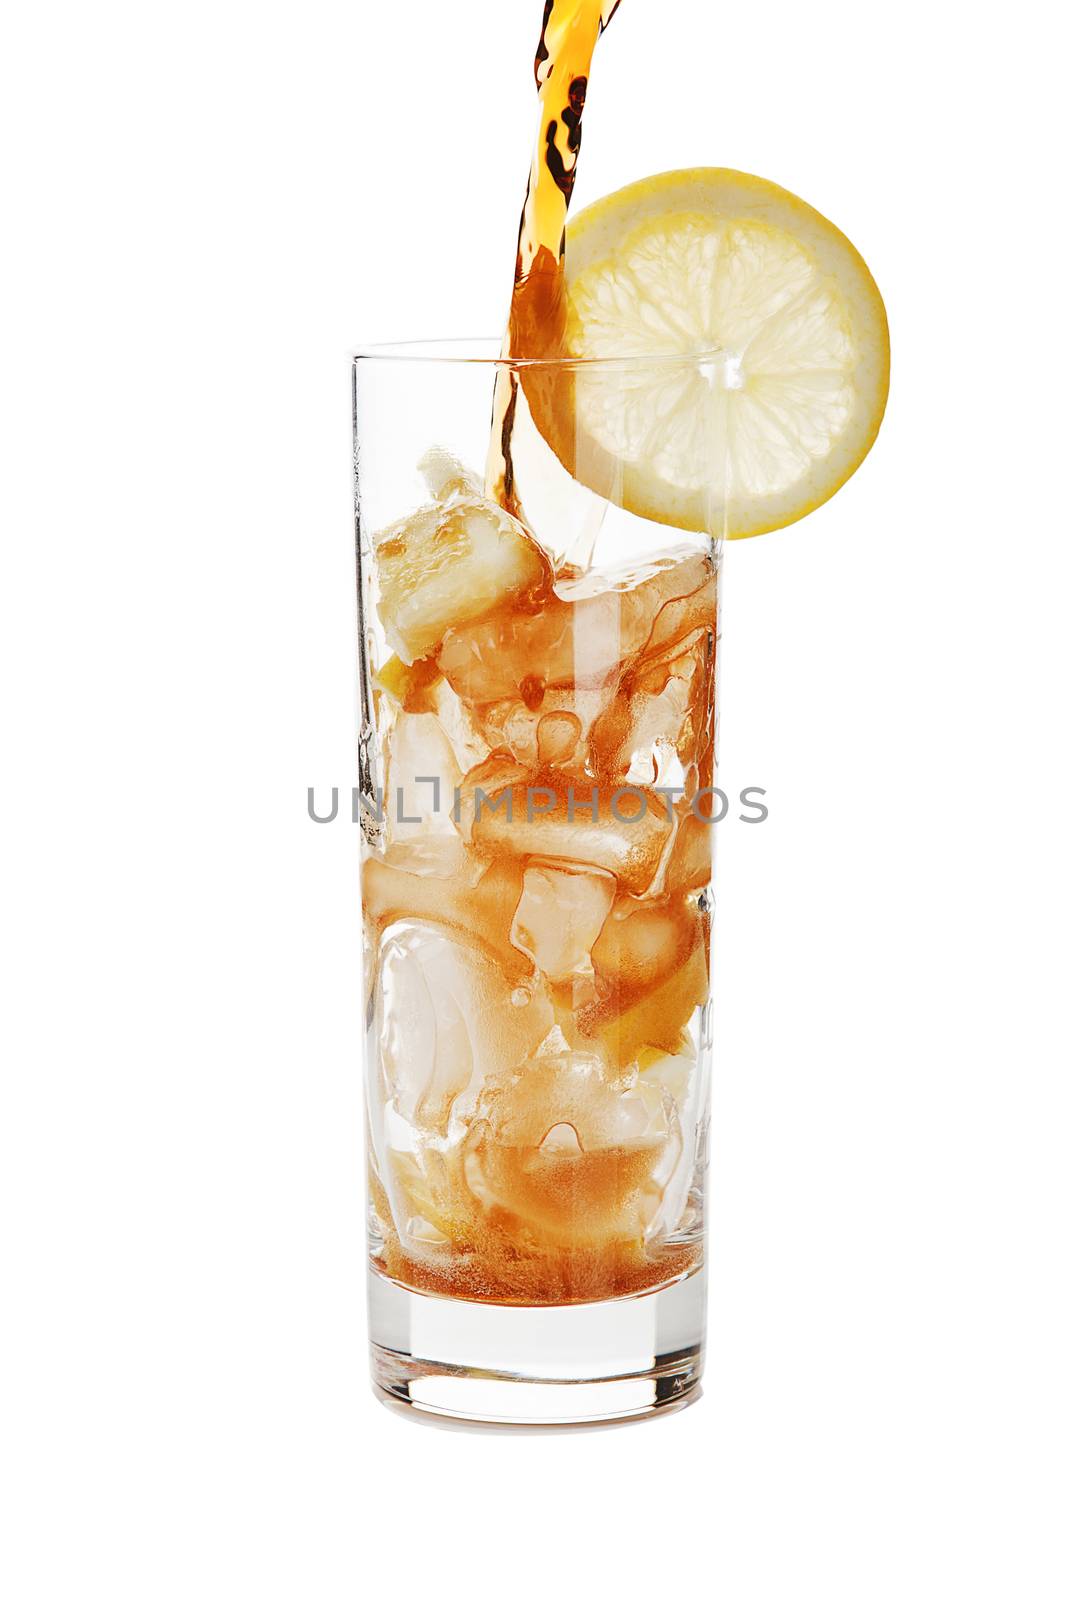 Pouring cola into a glass with ice isolated on white background.